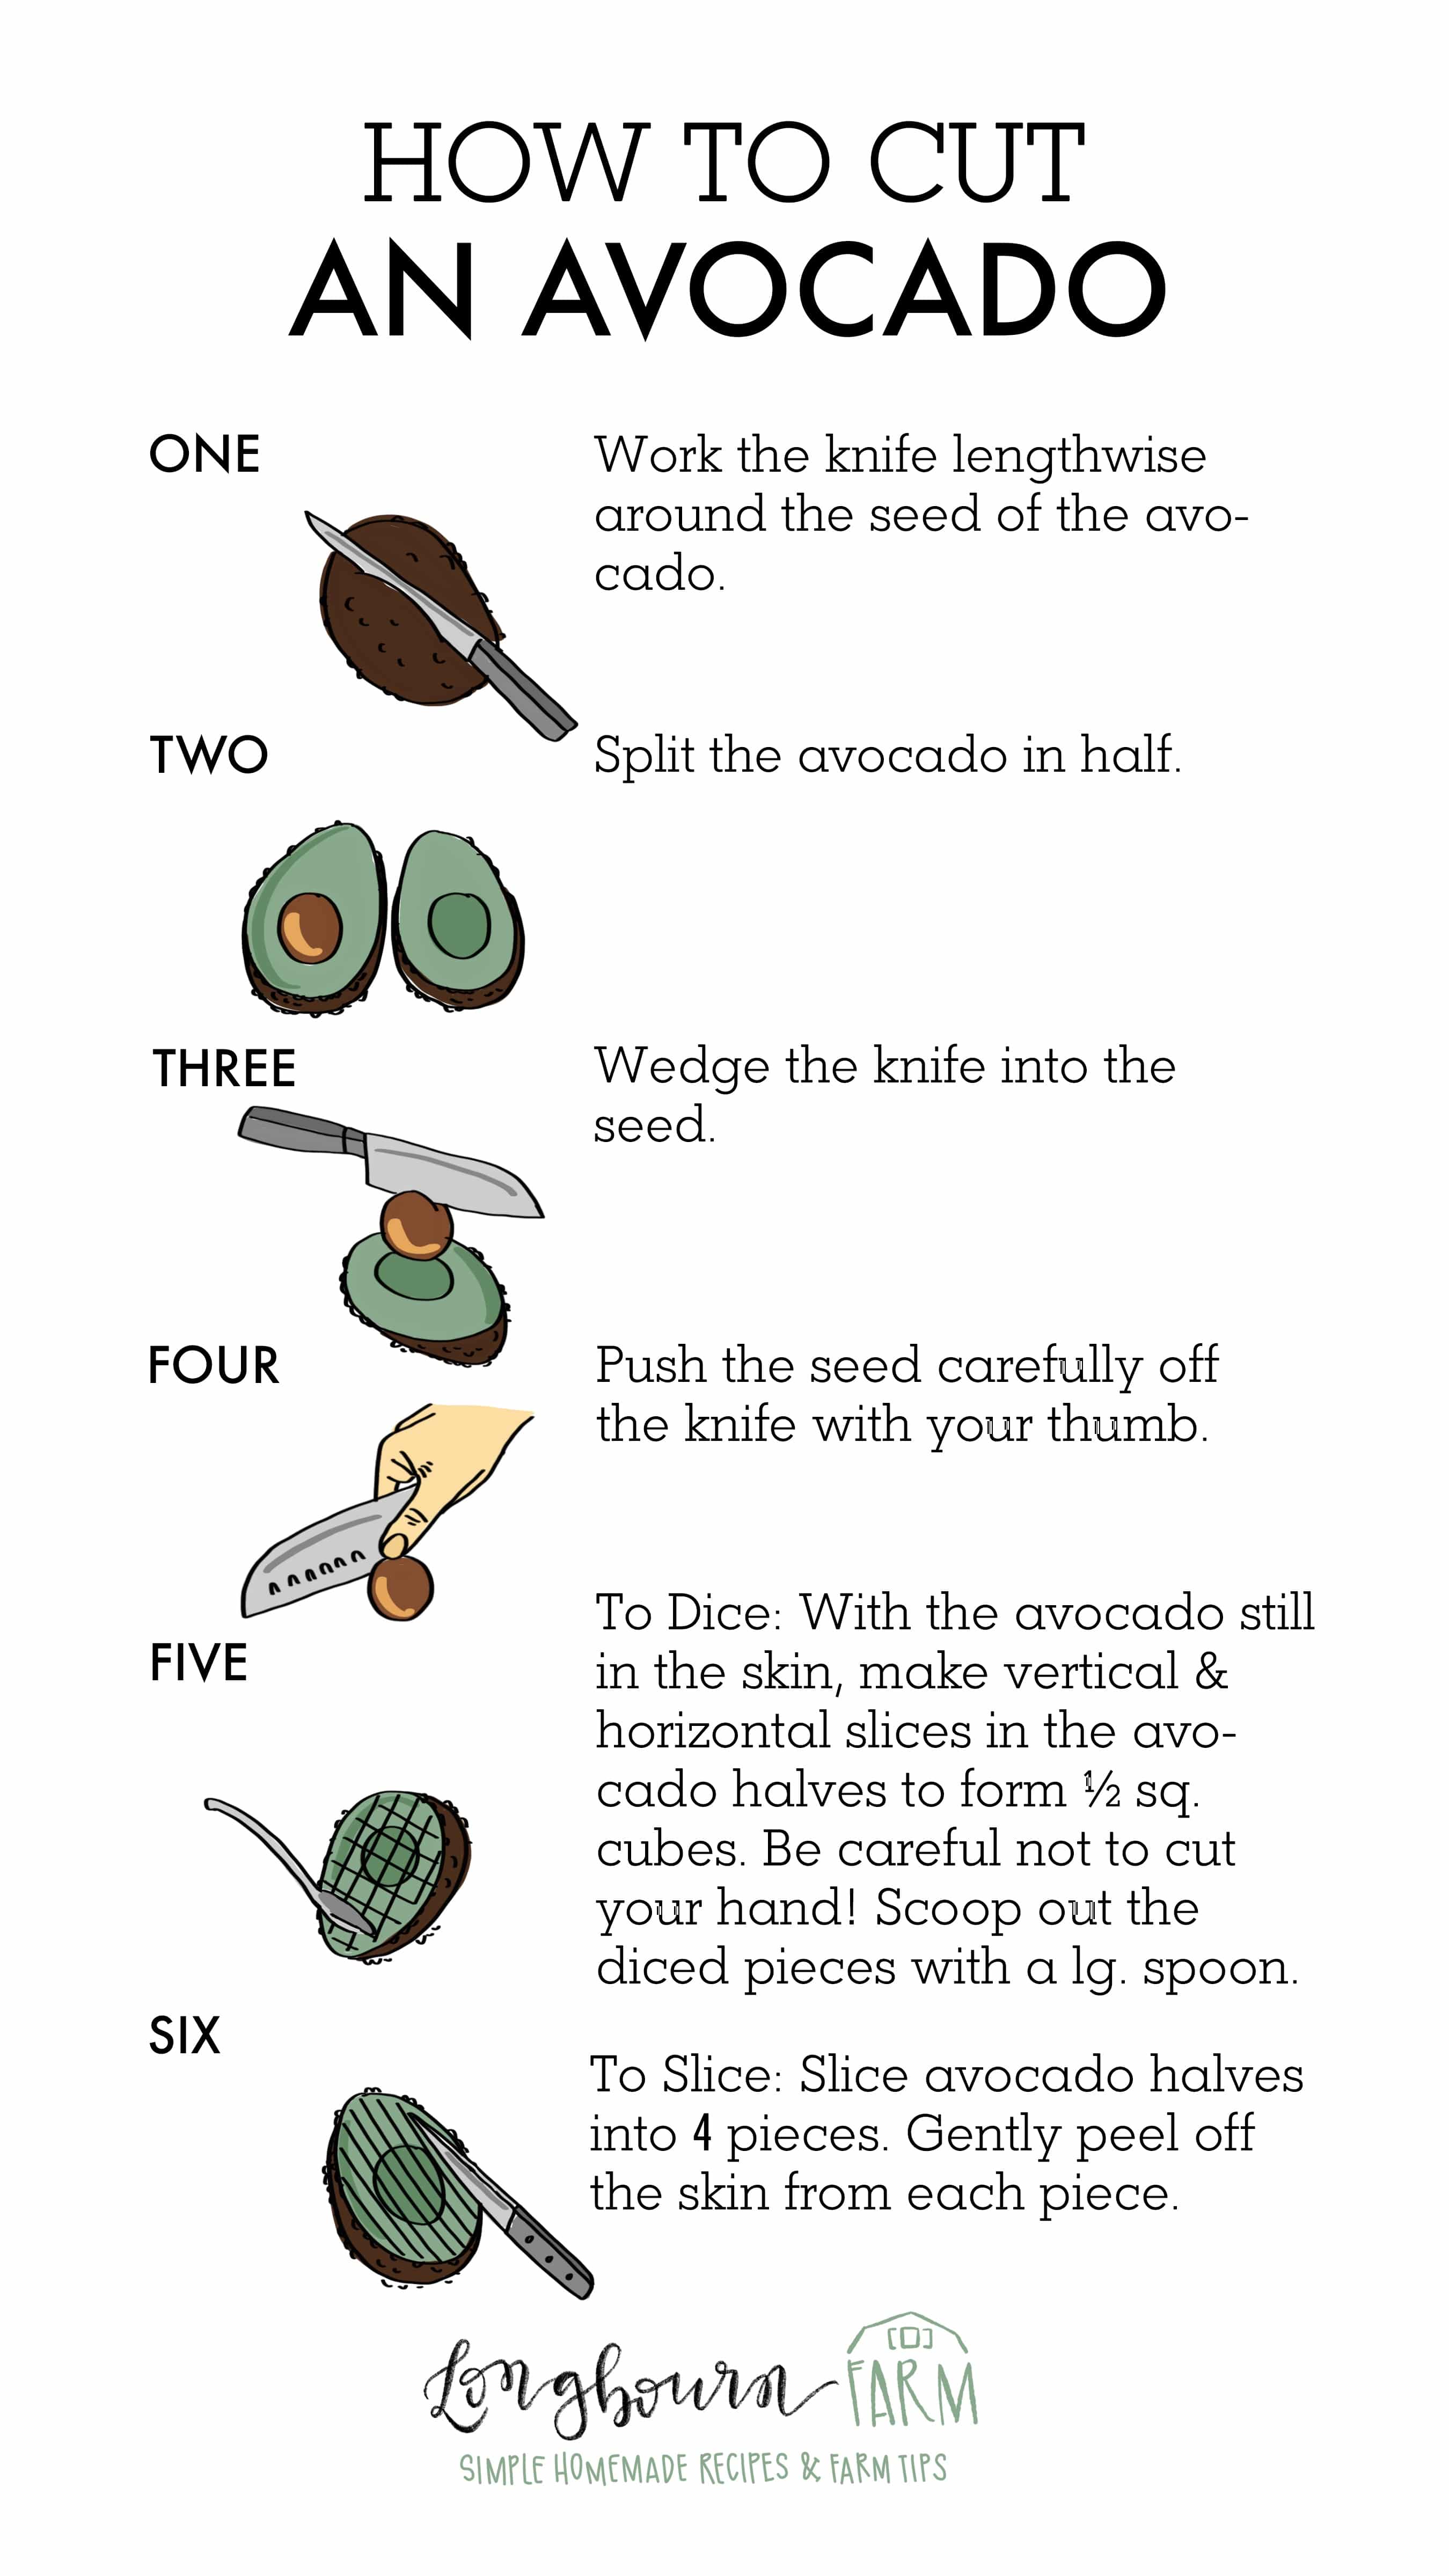 Learning how to cut an avocado is easy! Do it the right way to make sure you're safe and to make sure that you get as much of the avocado as possible. #avocado #howtocutanavocado #cuttinganavocado #avocadoslied